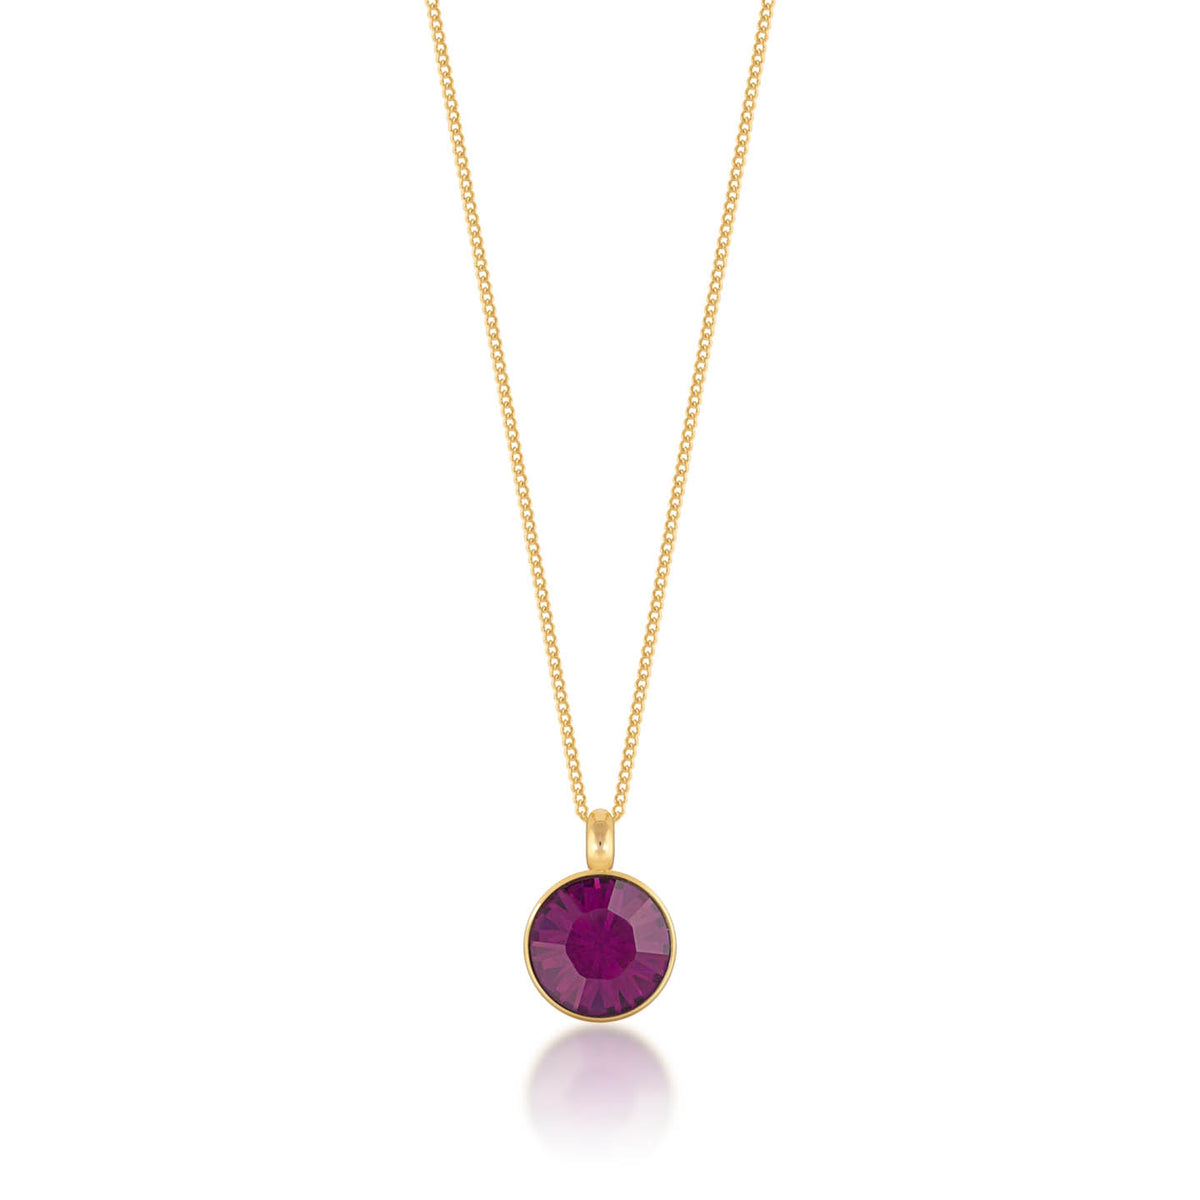 Bella Pendant Necklace with Purple Amethyst Round Crystals from Swarovski Gold Plated - Ed Heart